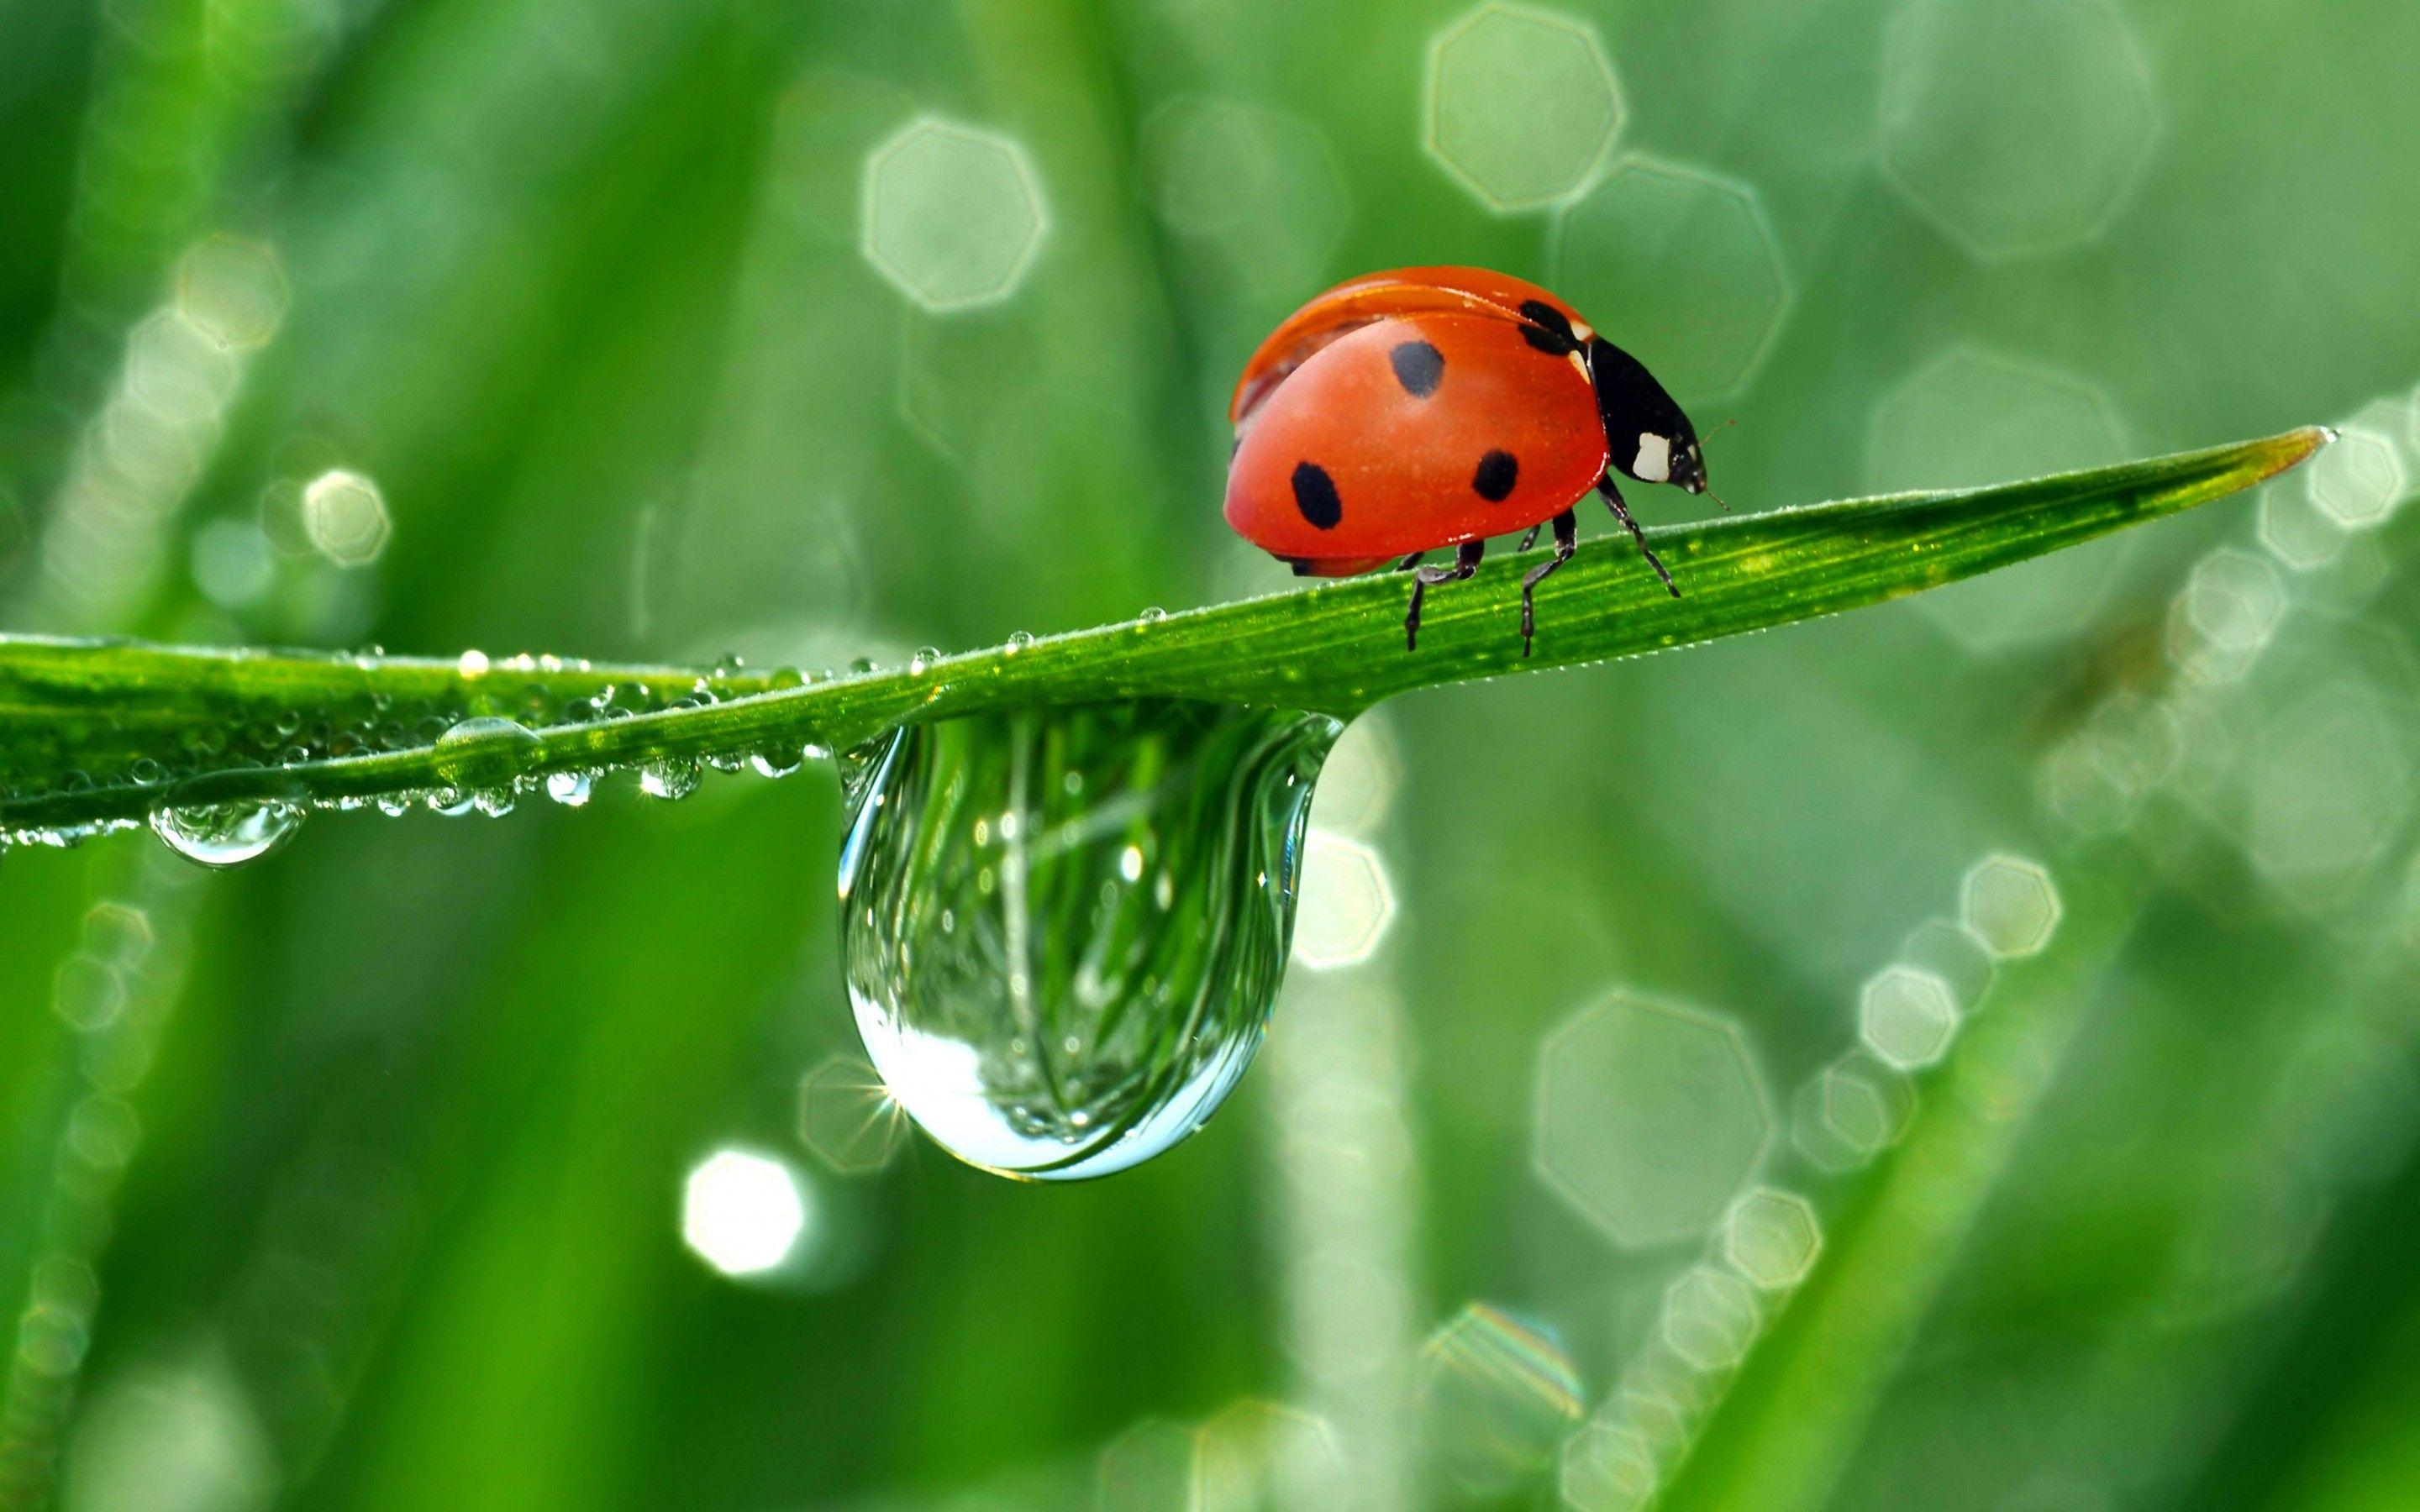 Cute Ladybug and Water Drops Wallpaper Full HD High Resolution